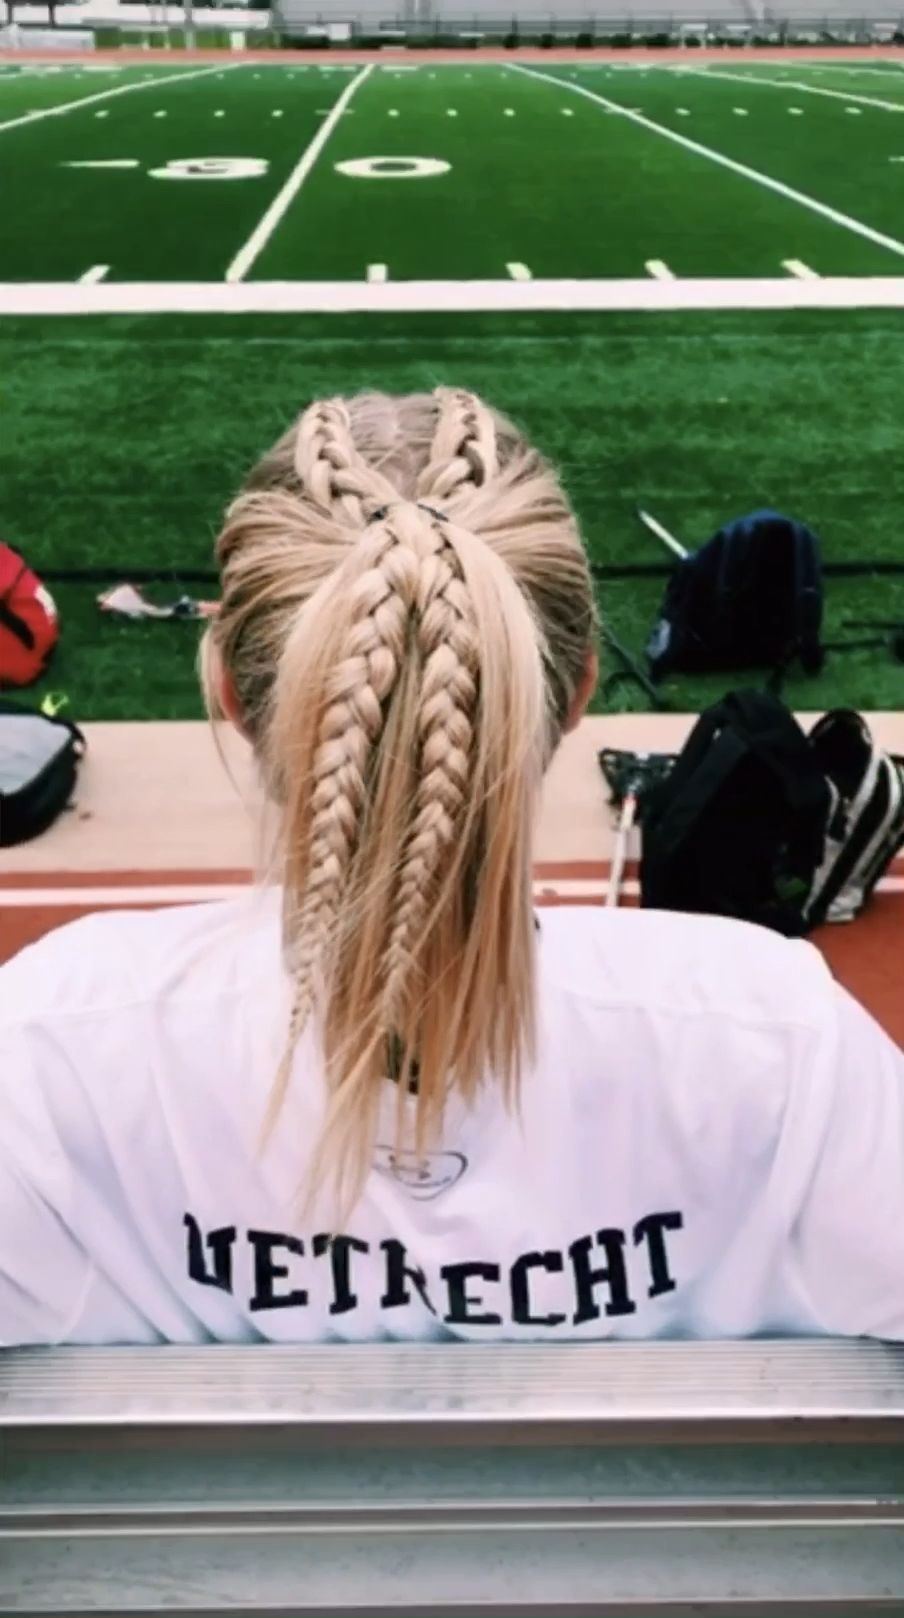 16 hairstyles For Girls athletic ideas